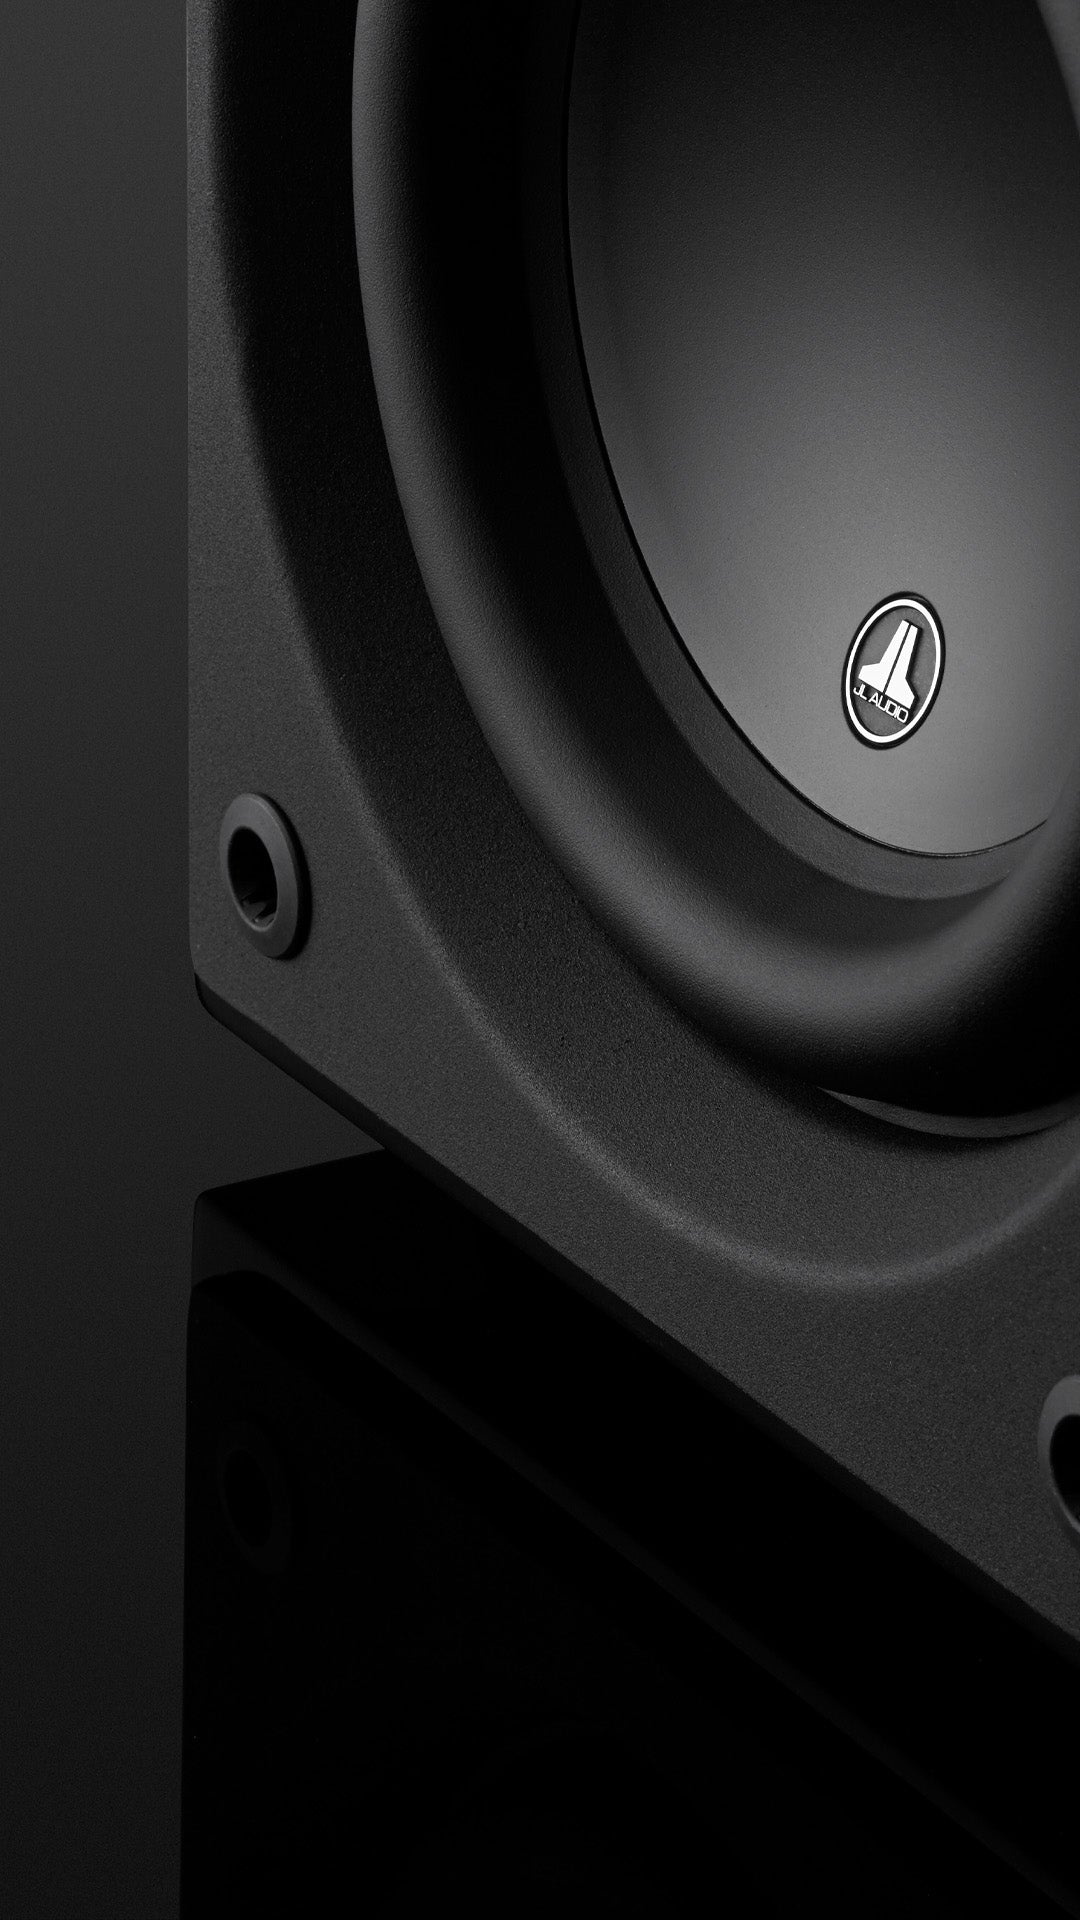 Close-up view of Dominion d110 subwoofer gloss finish.